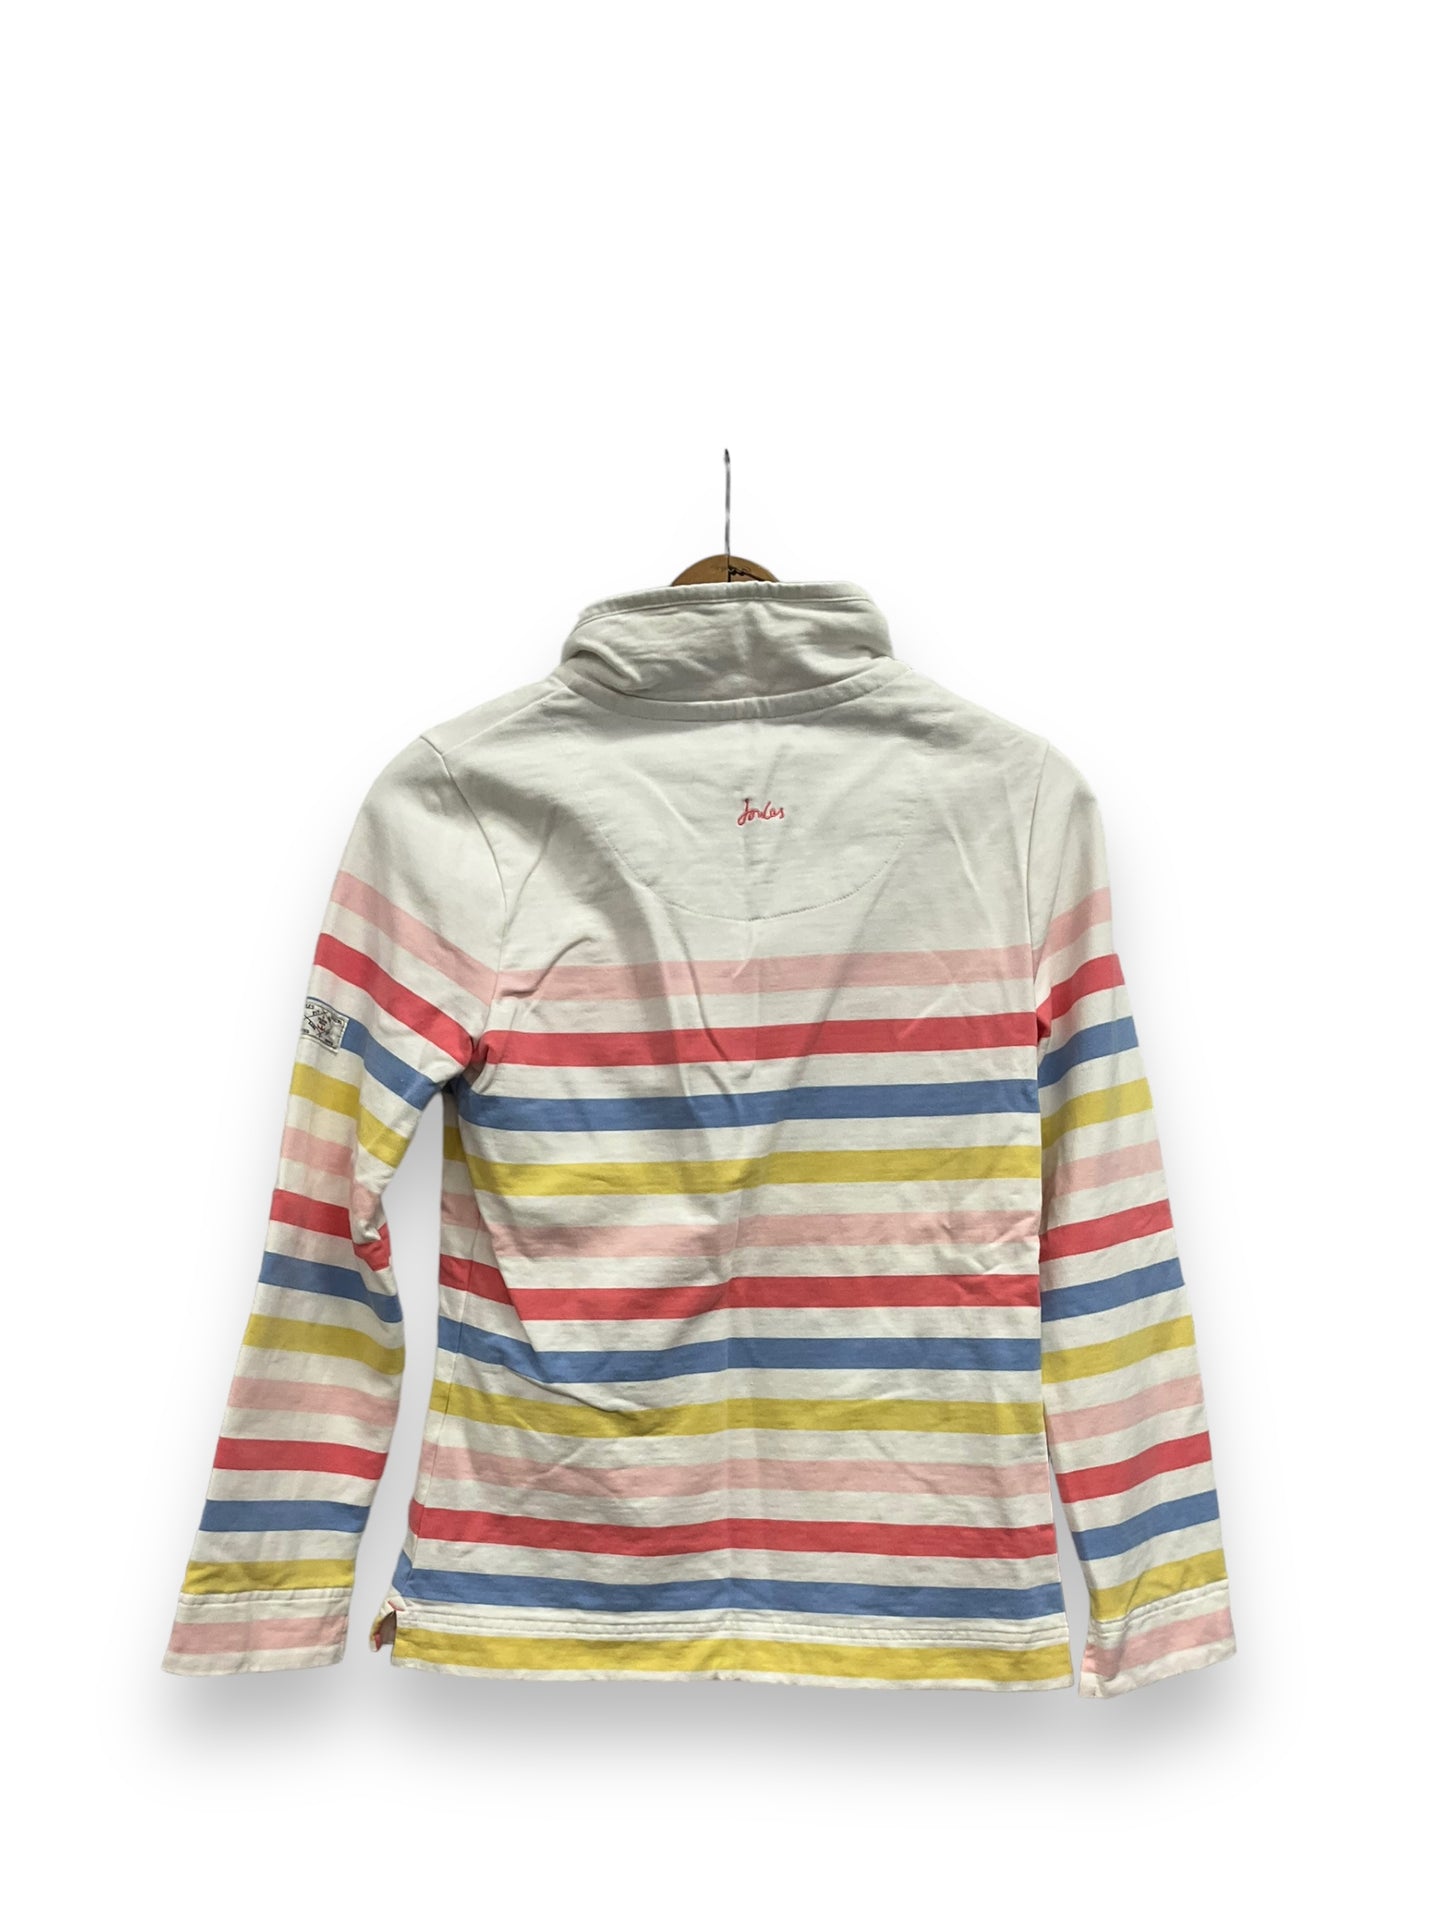 Sweatshirt Collar By Joules  Size: S